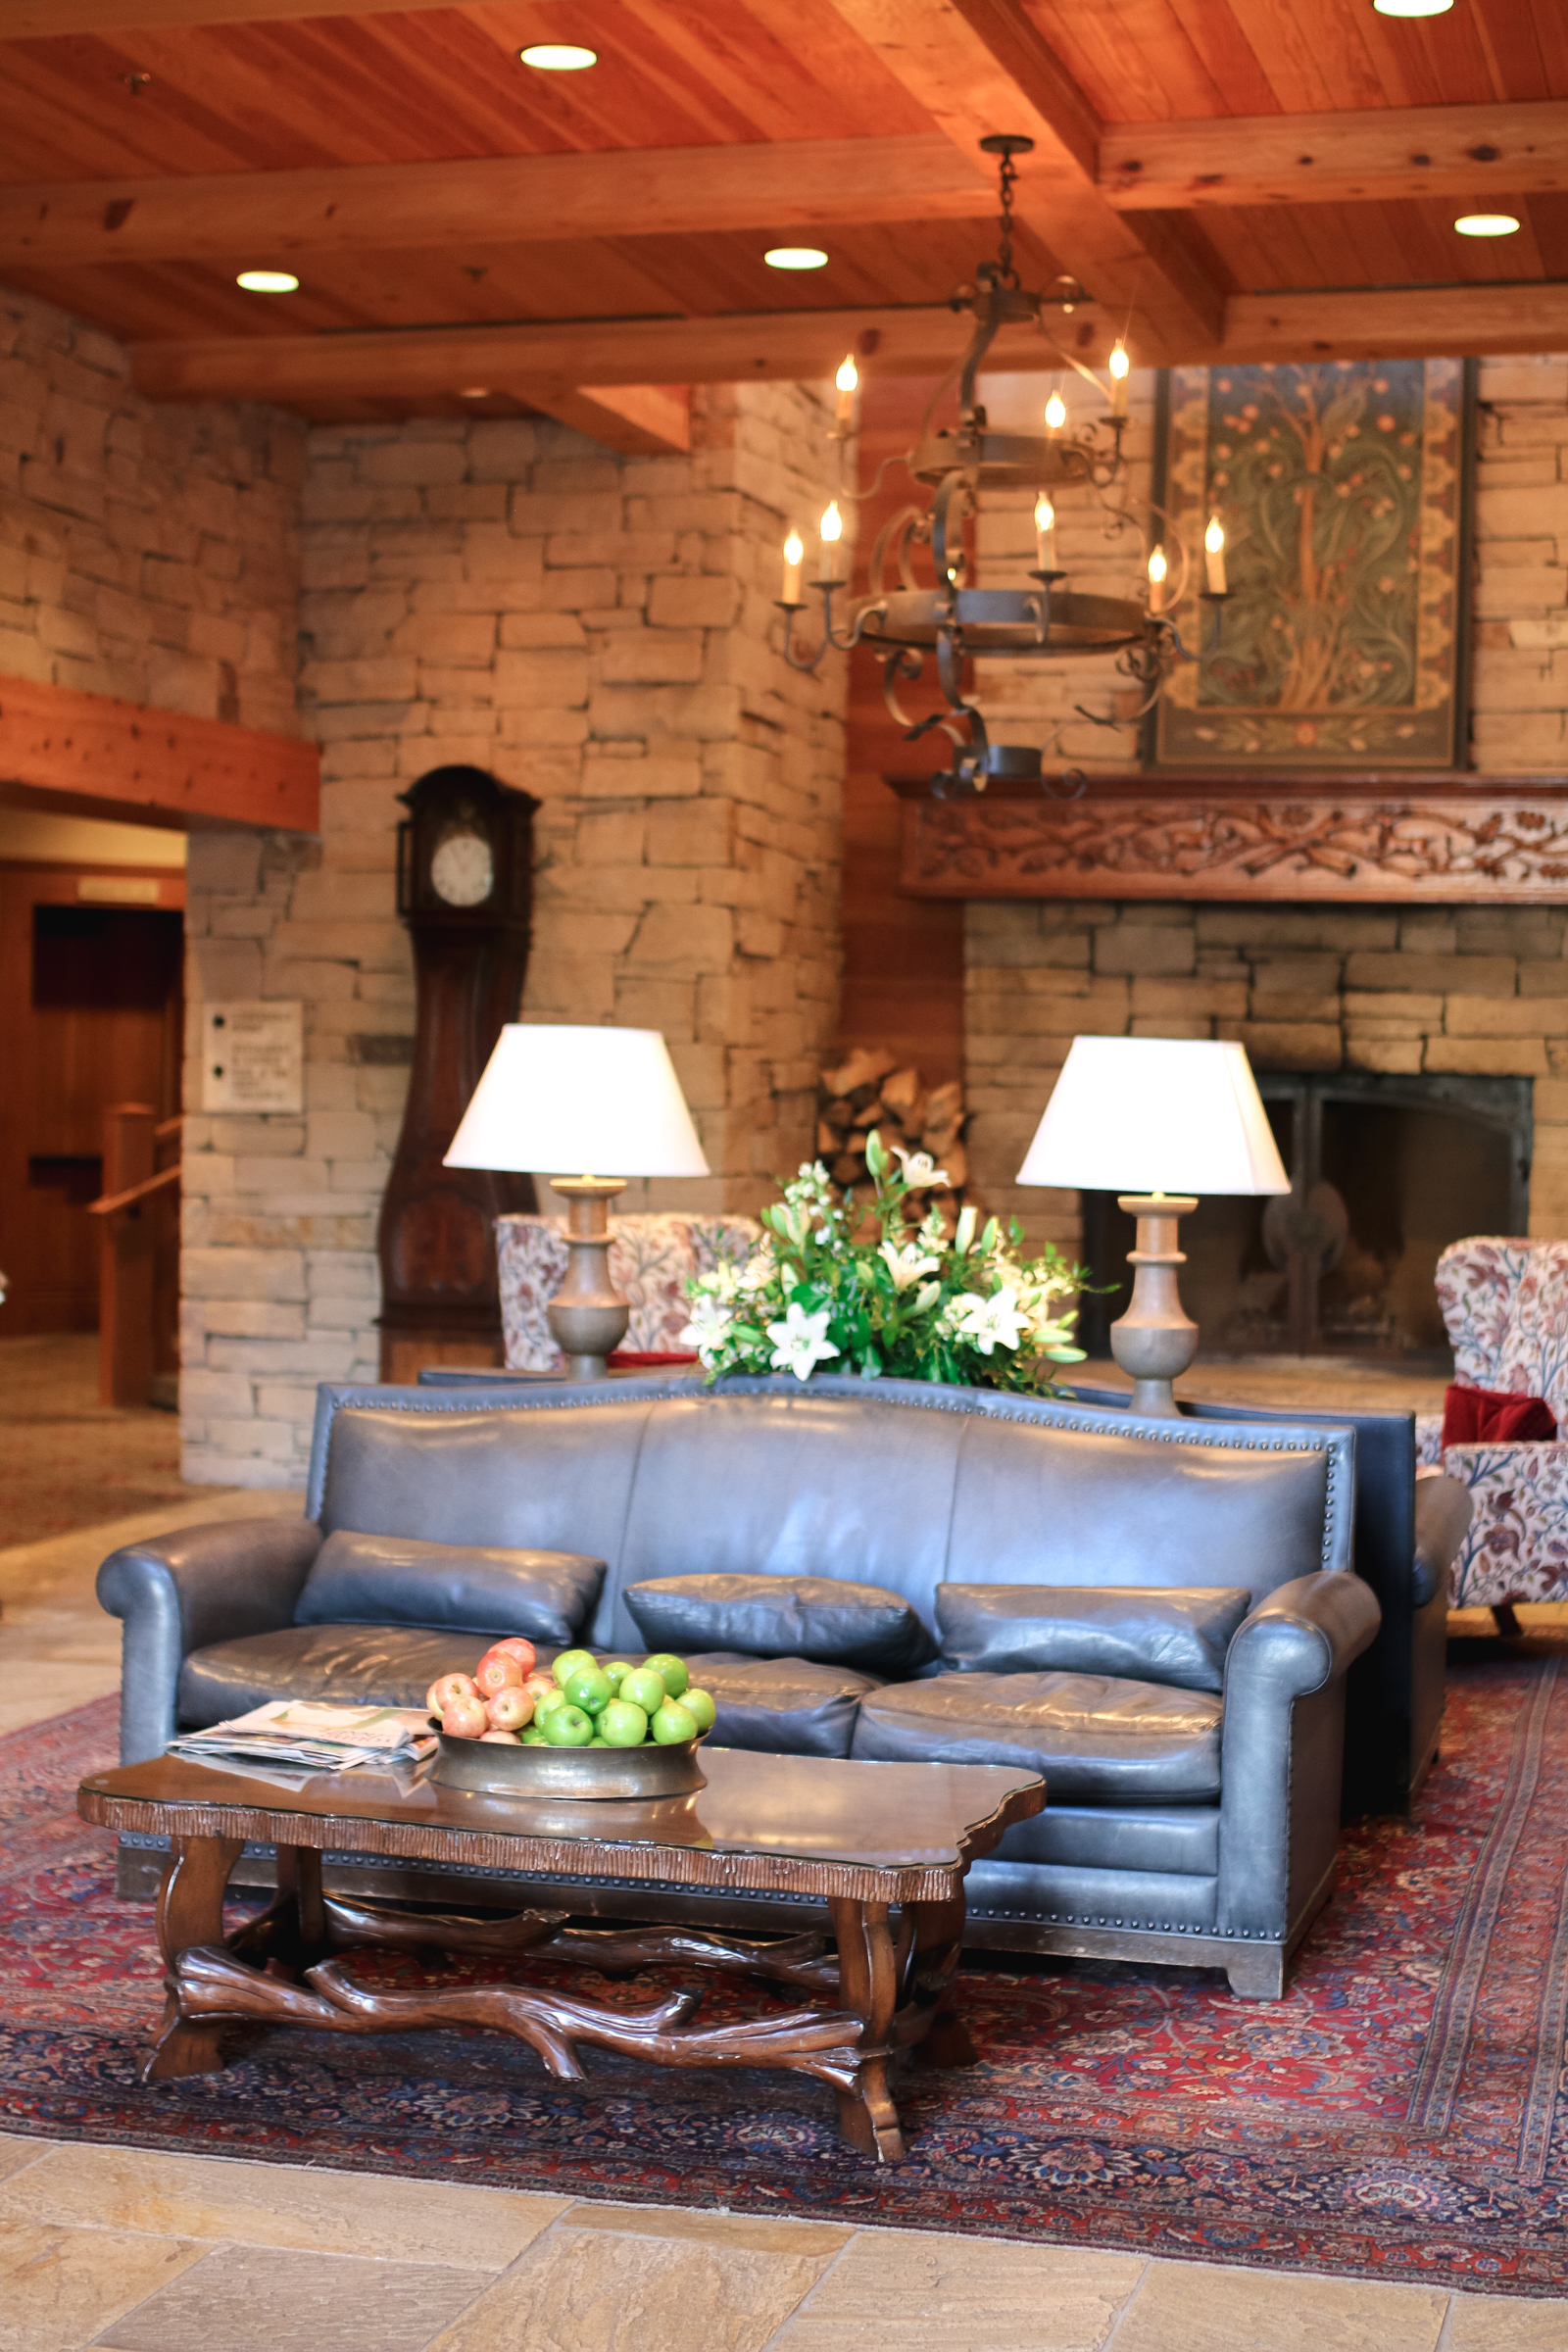 A relaxing Park City Resort staycation at Stein Eriksen Lodge by popular Utah blogger Sandy A La Mode